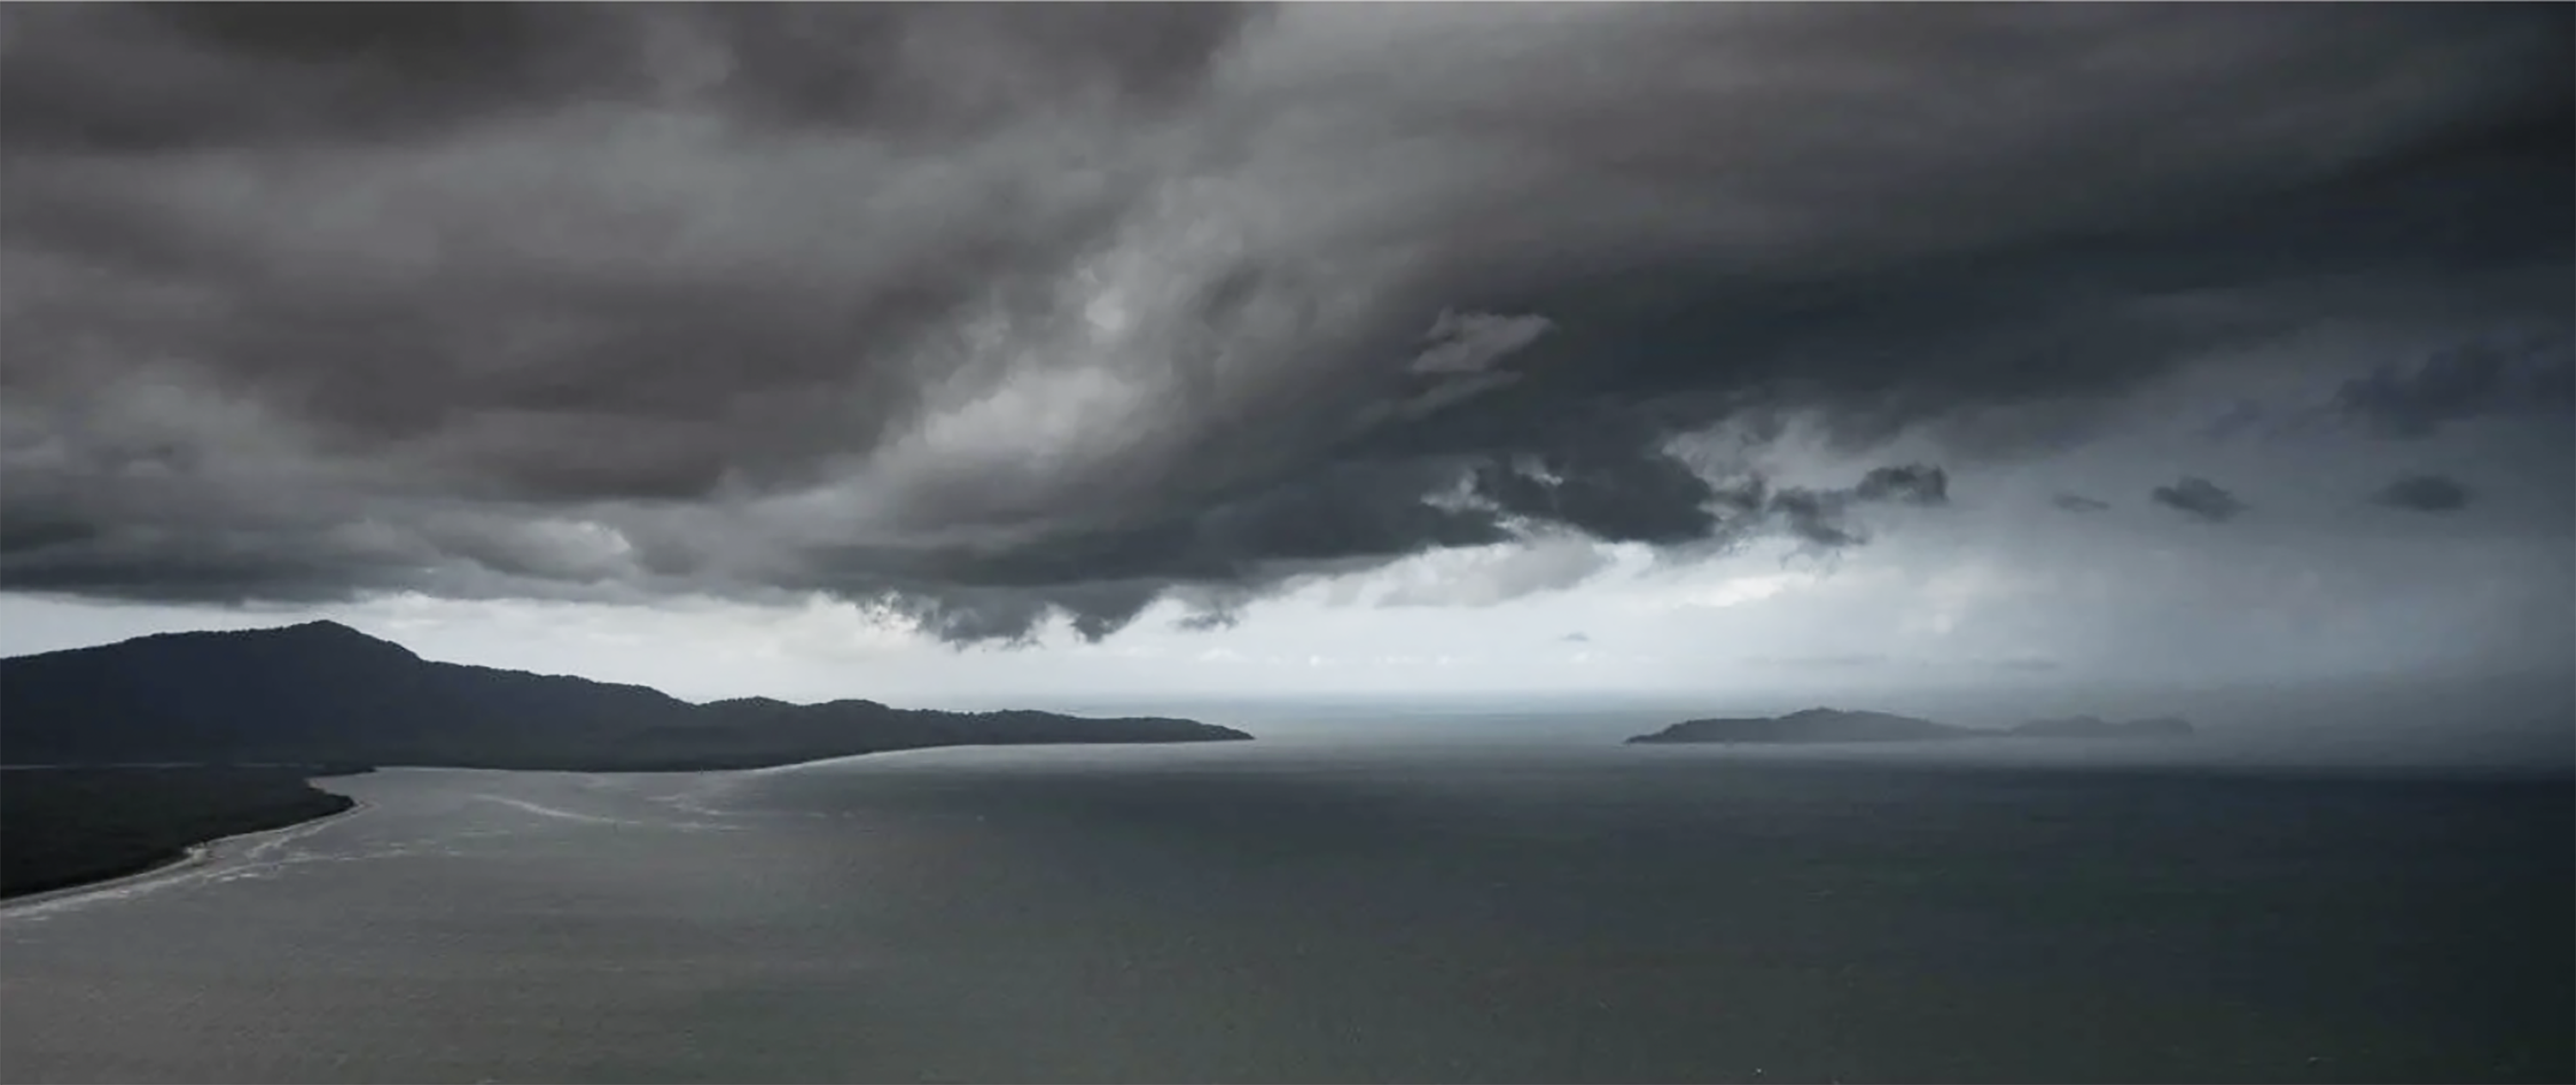 Approaching Storm, Far North Queensland